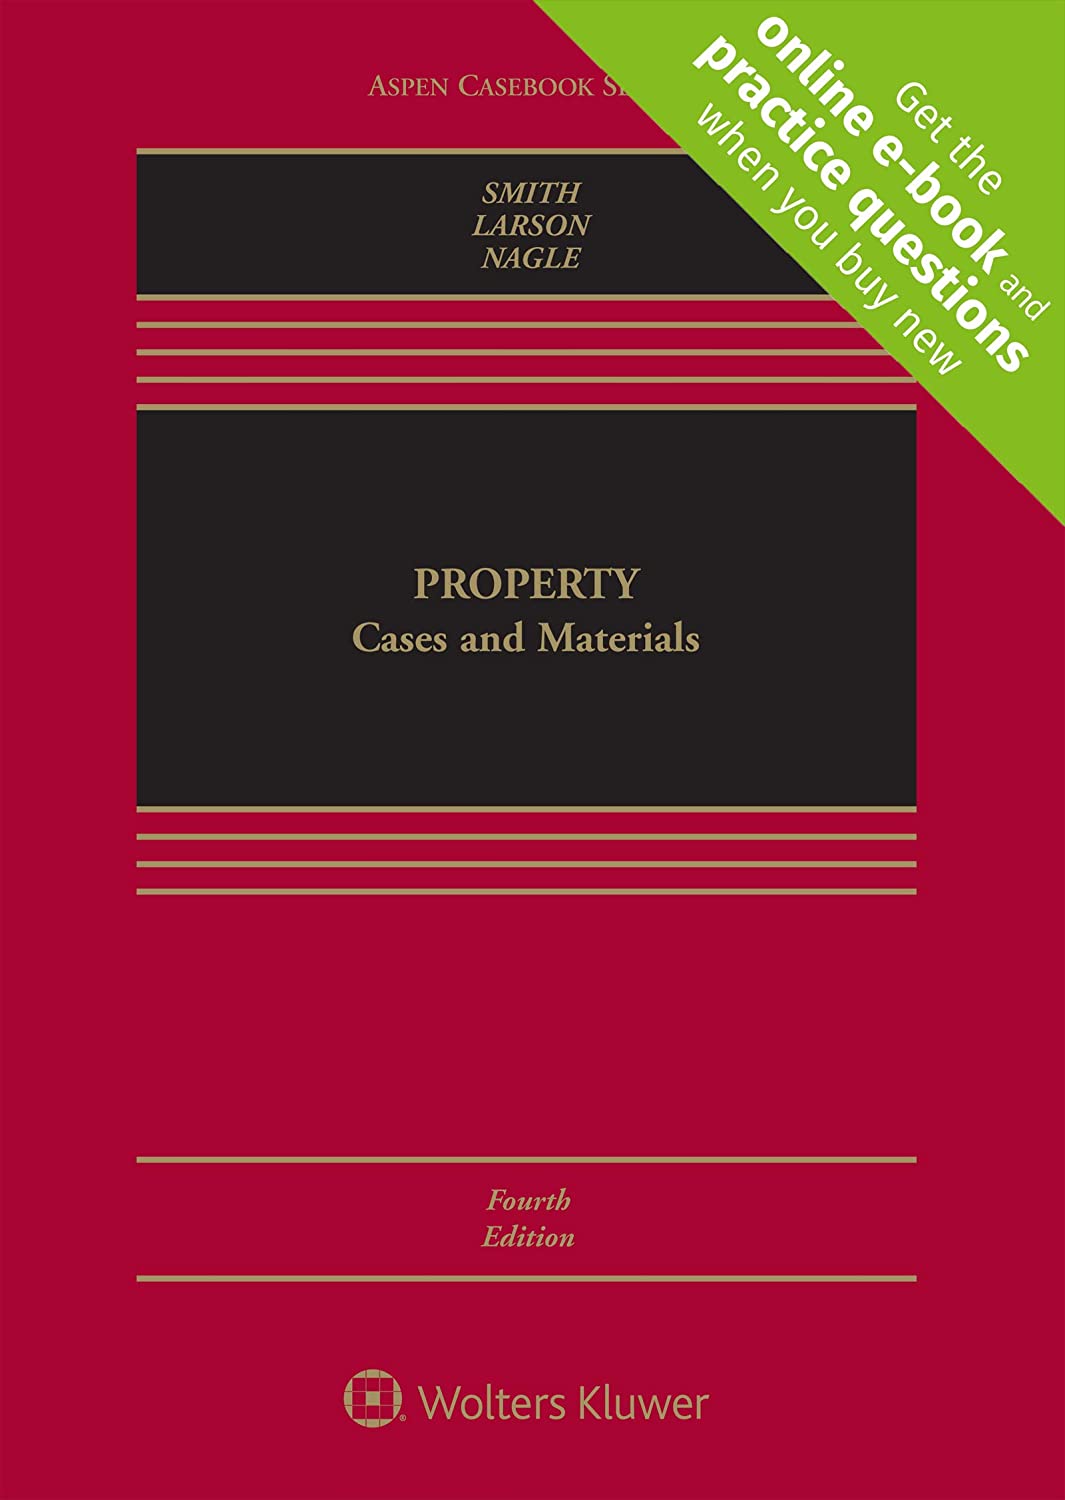 Property: Cases and Materials (Aspen Casebook) [Connected Casebook]